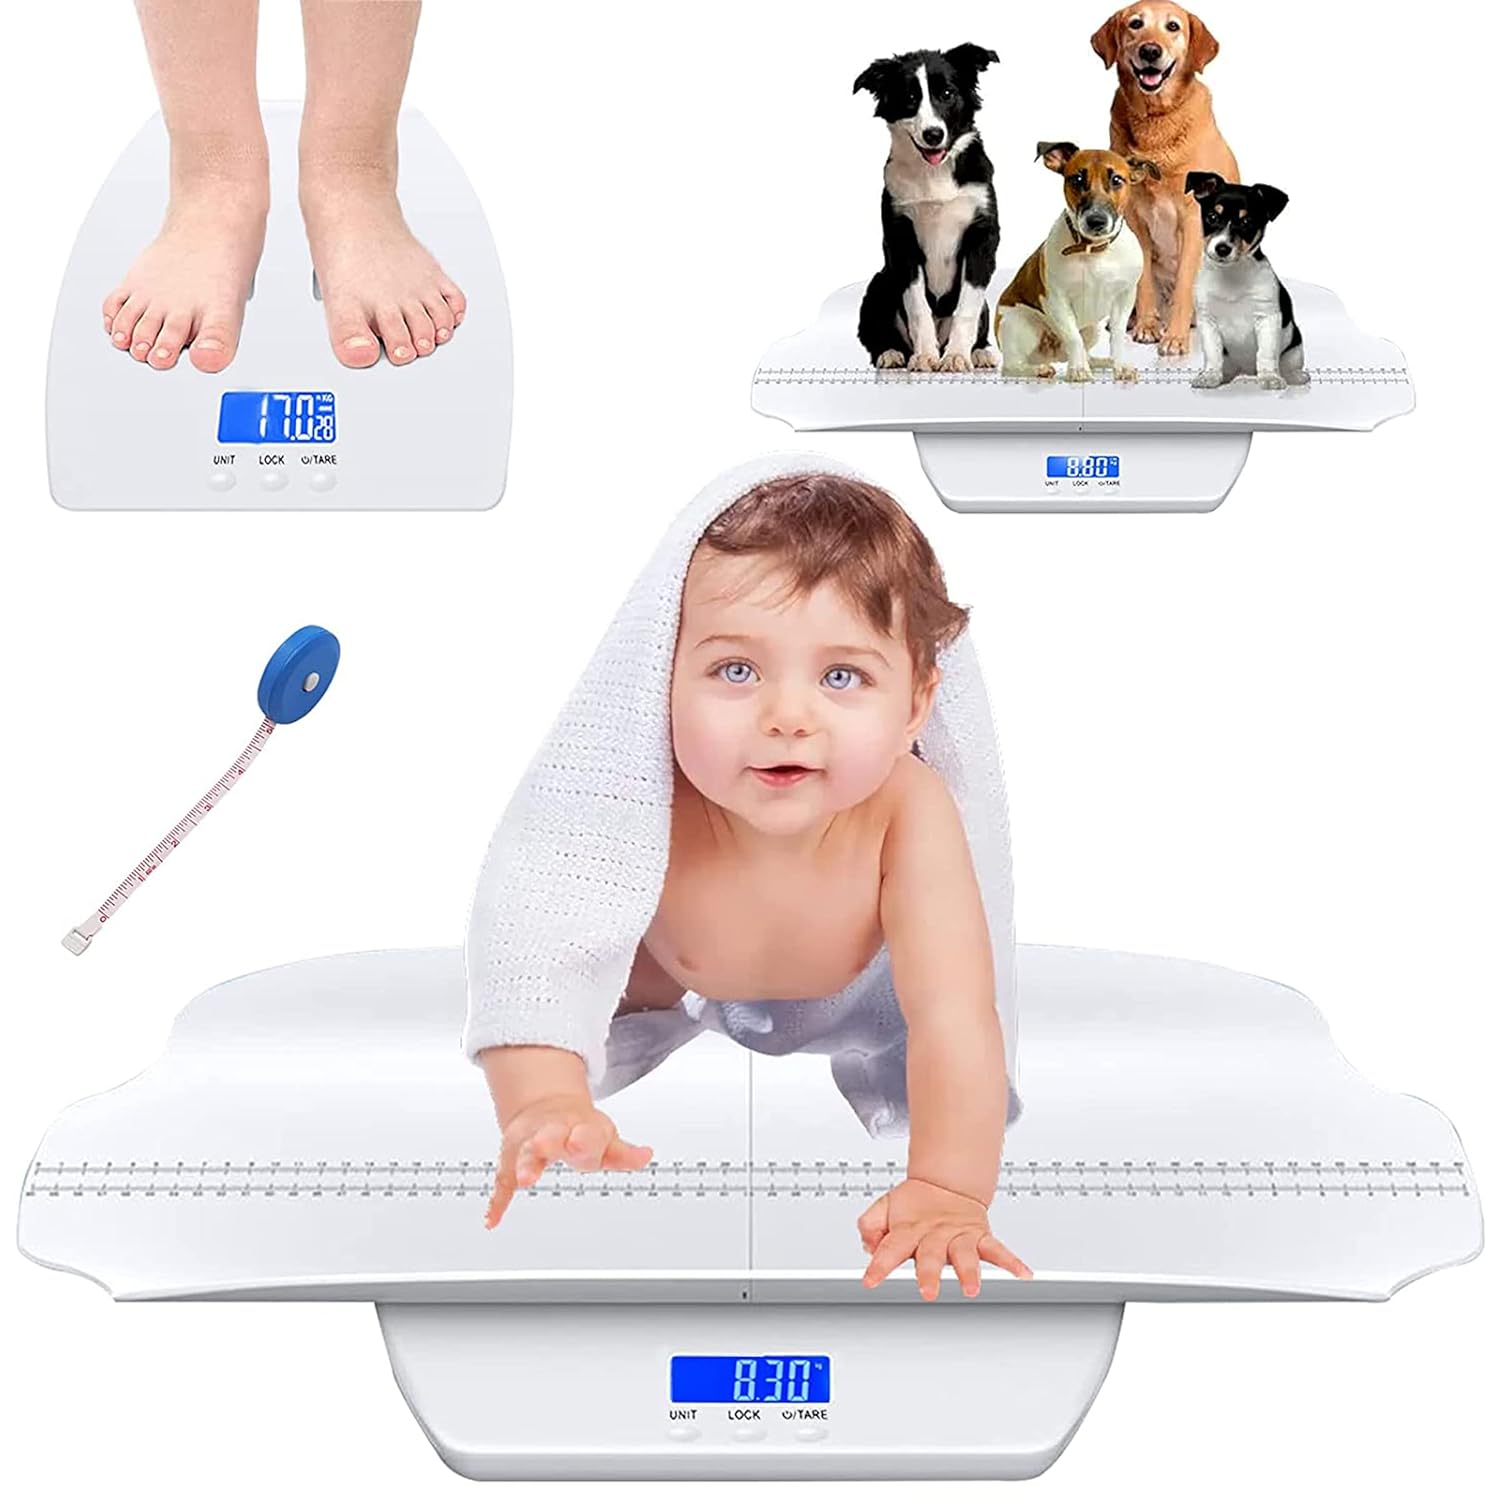 Baby Weighing Scale | Digital Scale | Babies, Infants, Adults, Pets, Puppies, Cats, Dogs | Baby Scales - Great for Newborn/Underweight/Premature Babies | Up to 220 lb - New 2023